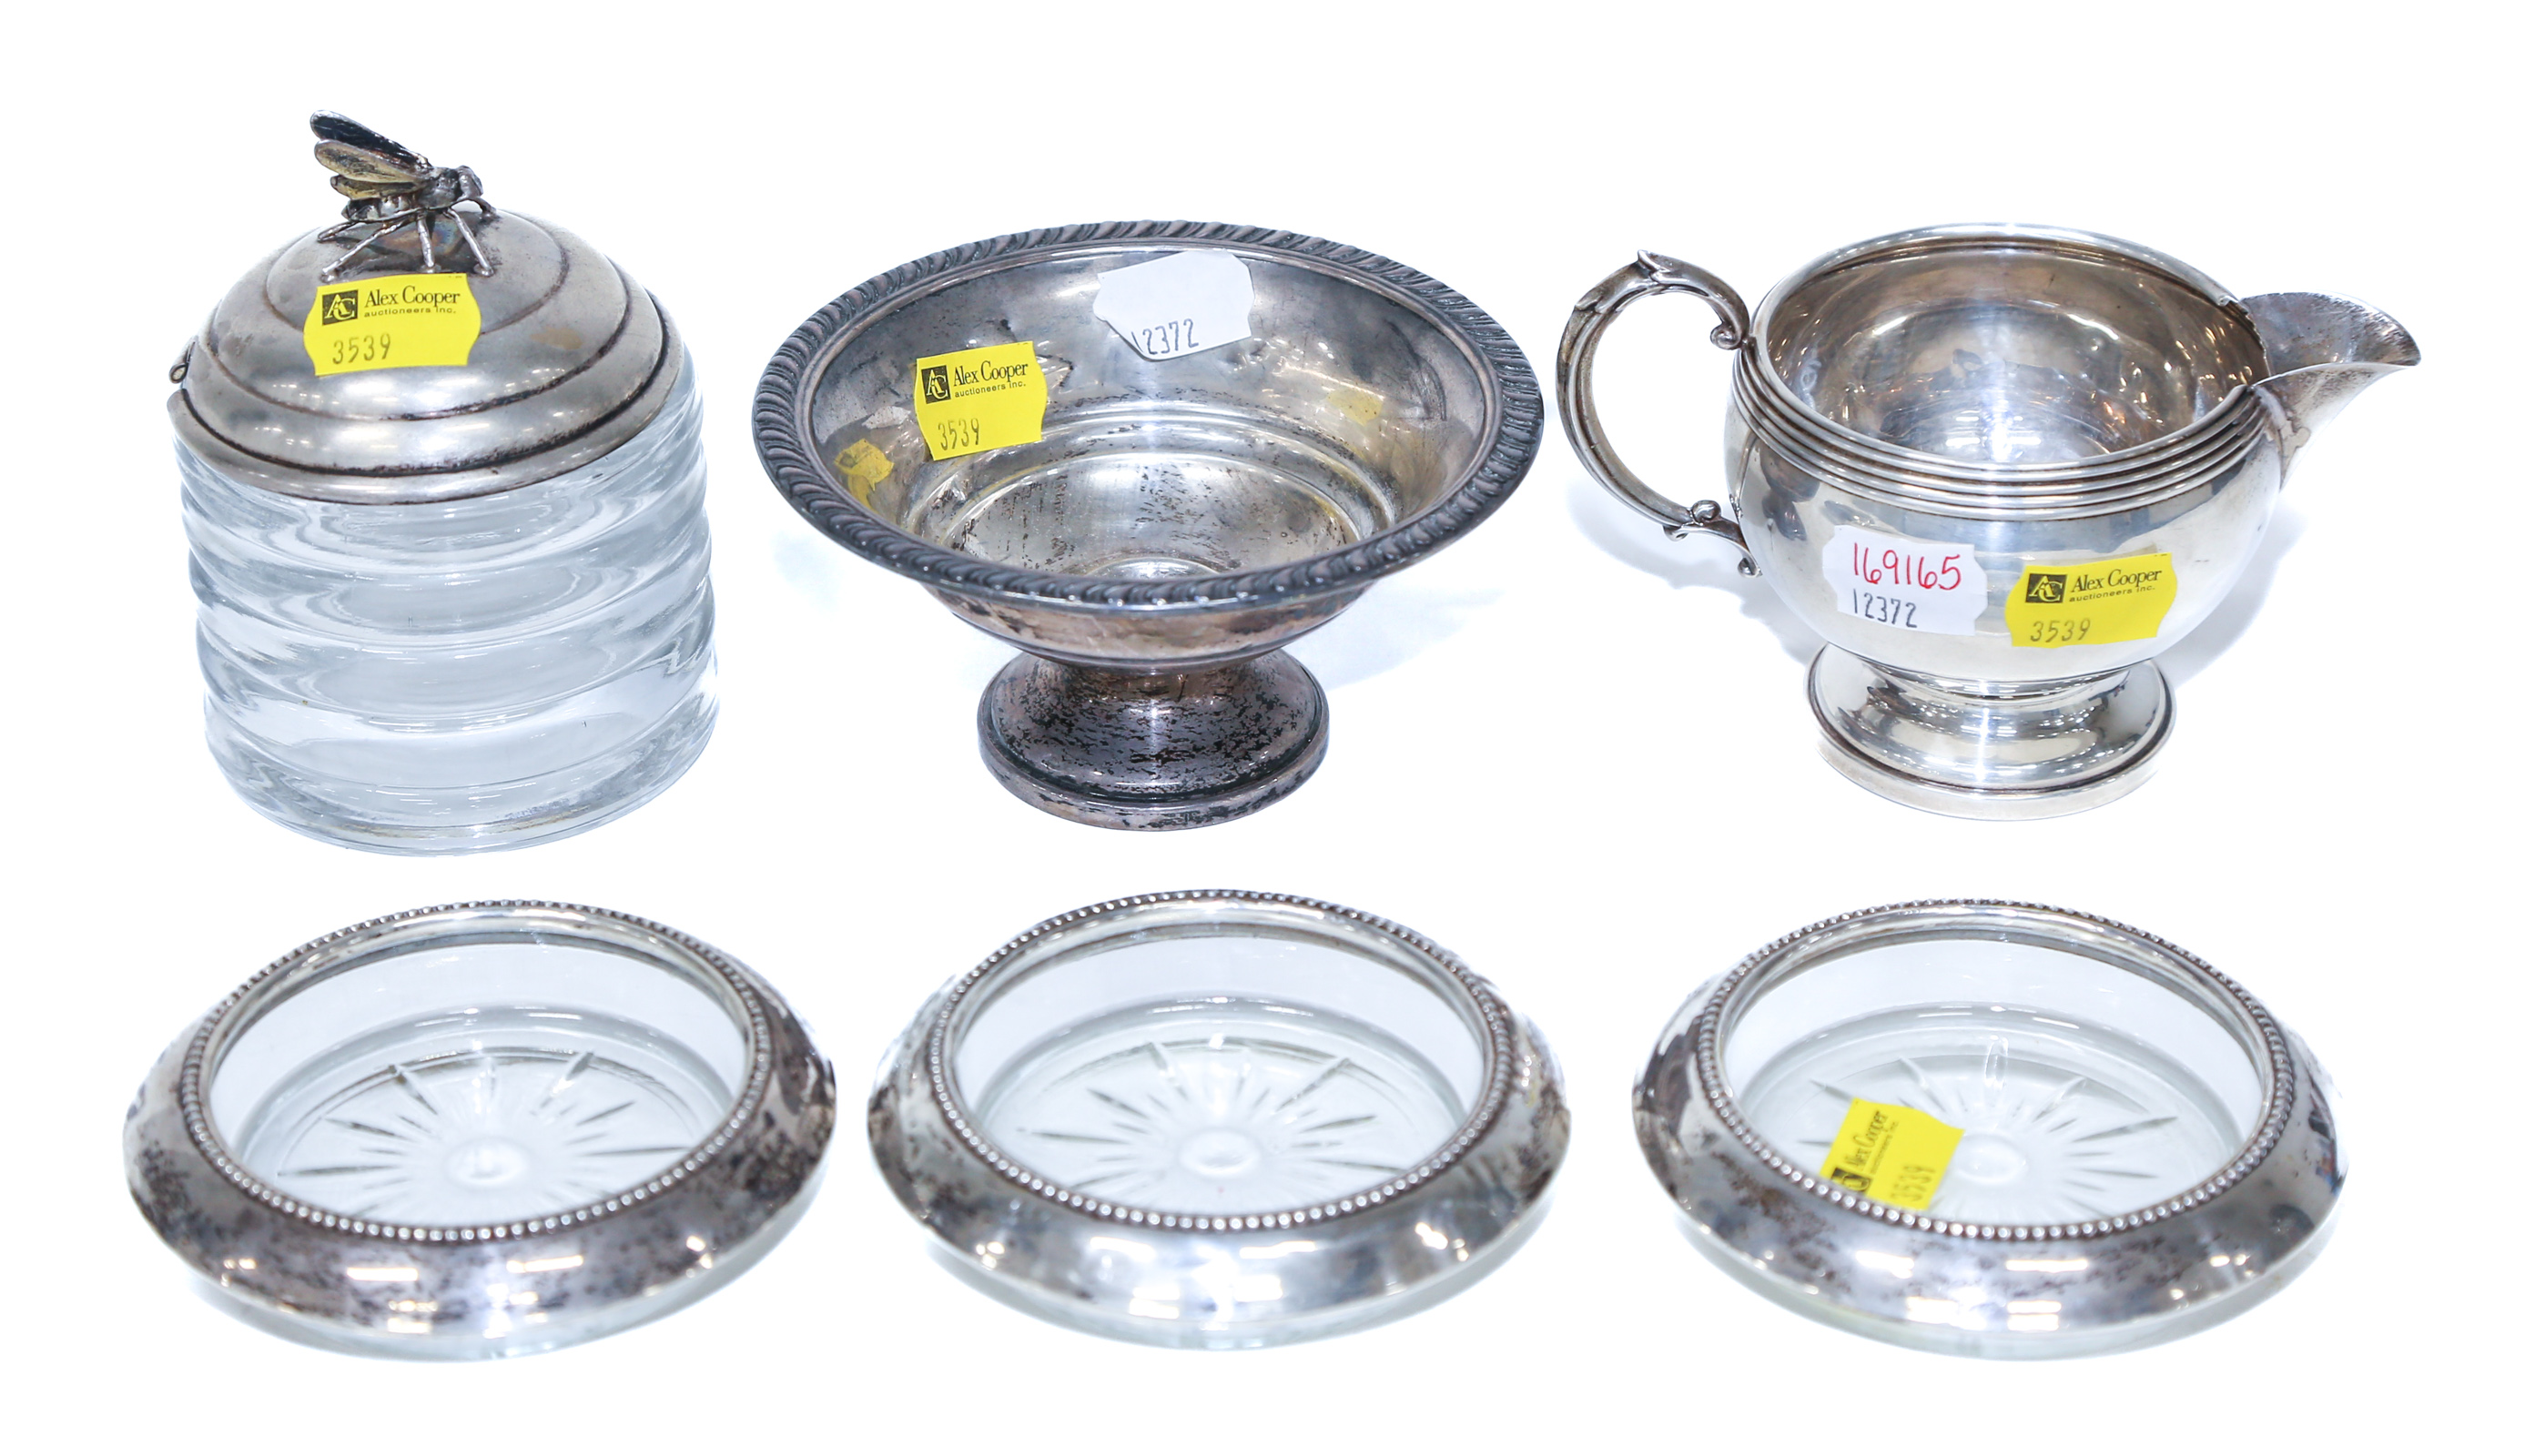 COLLECTION OF STERLING TABLE ITEMS 308a58